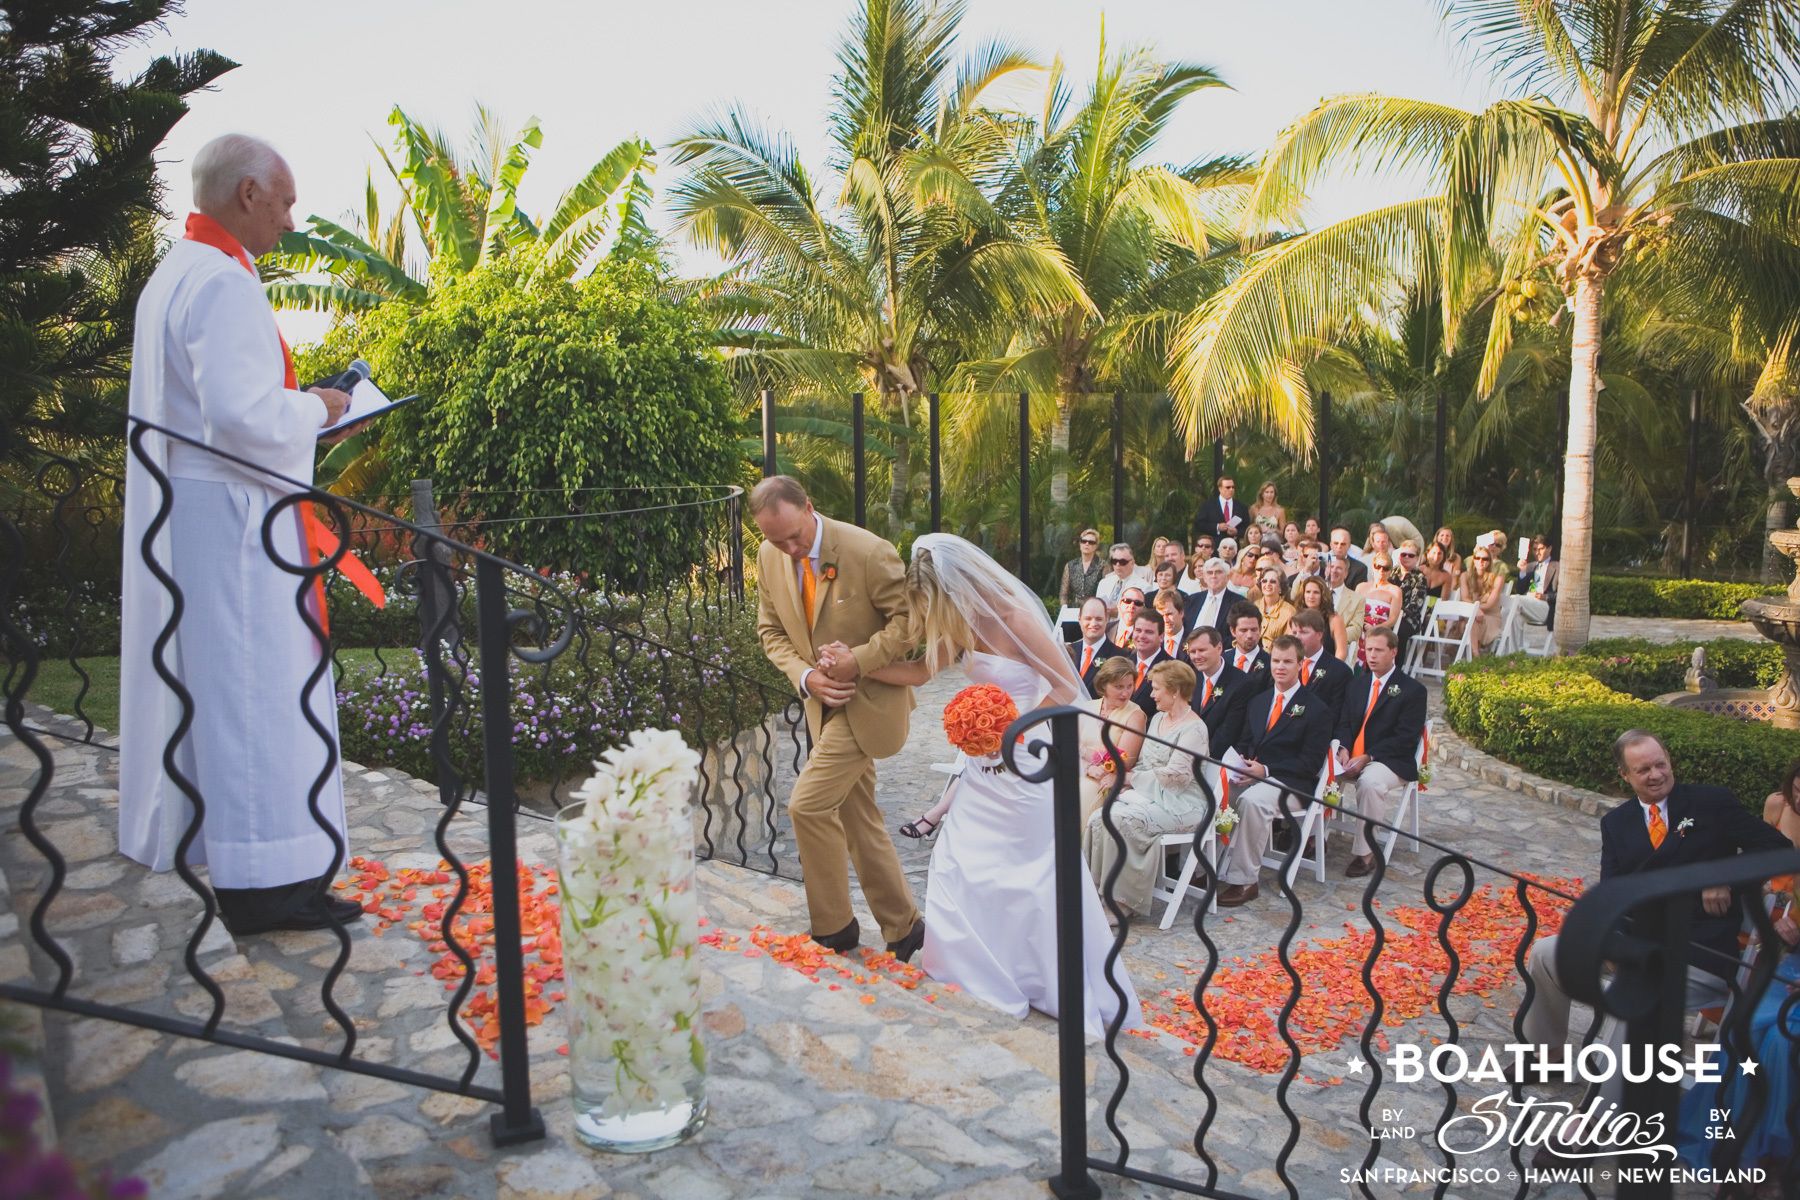 Mexico Wedding: The One & Only Plamilla (Cabo)